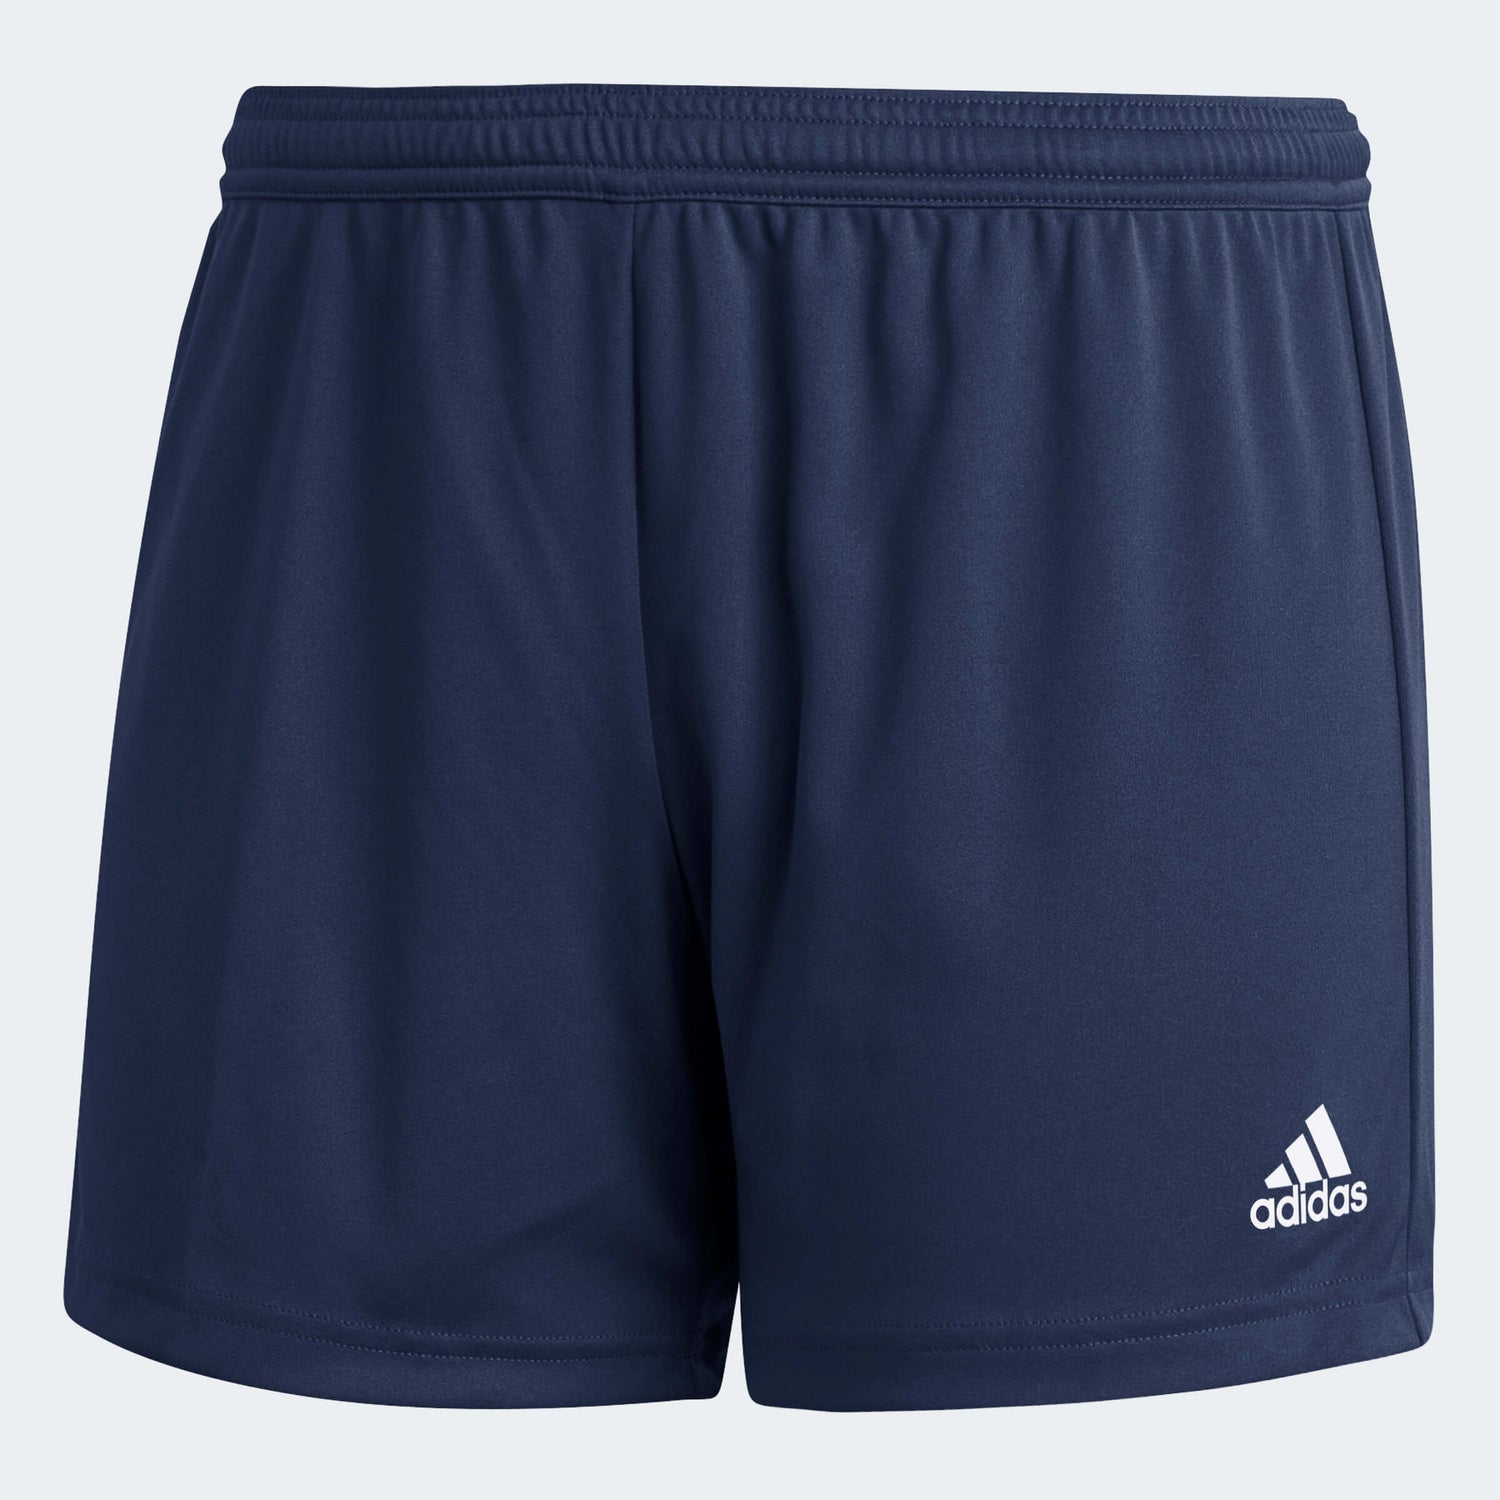 Soccer Shorts for Teams | Men's, Women's, Youth